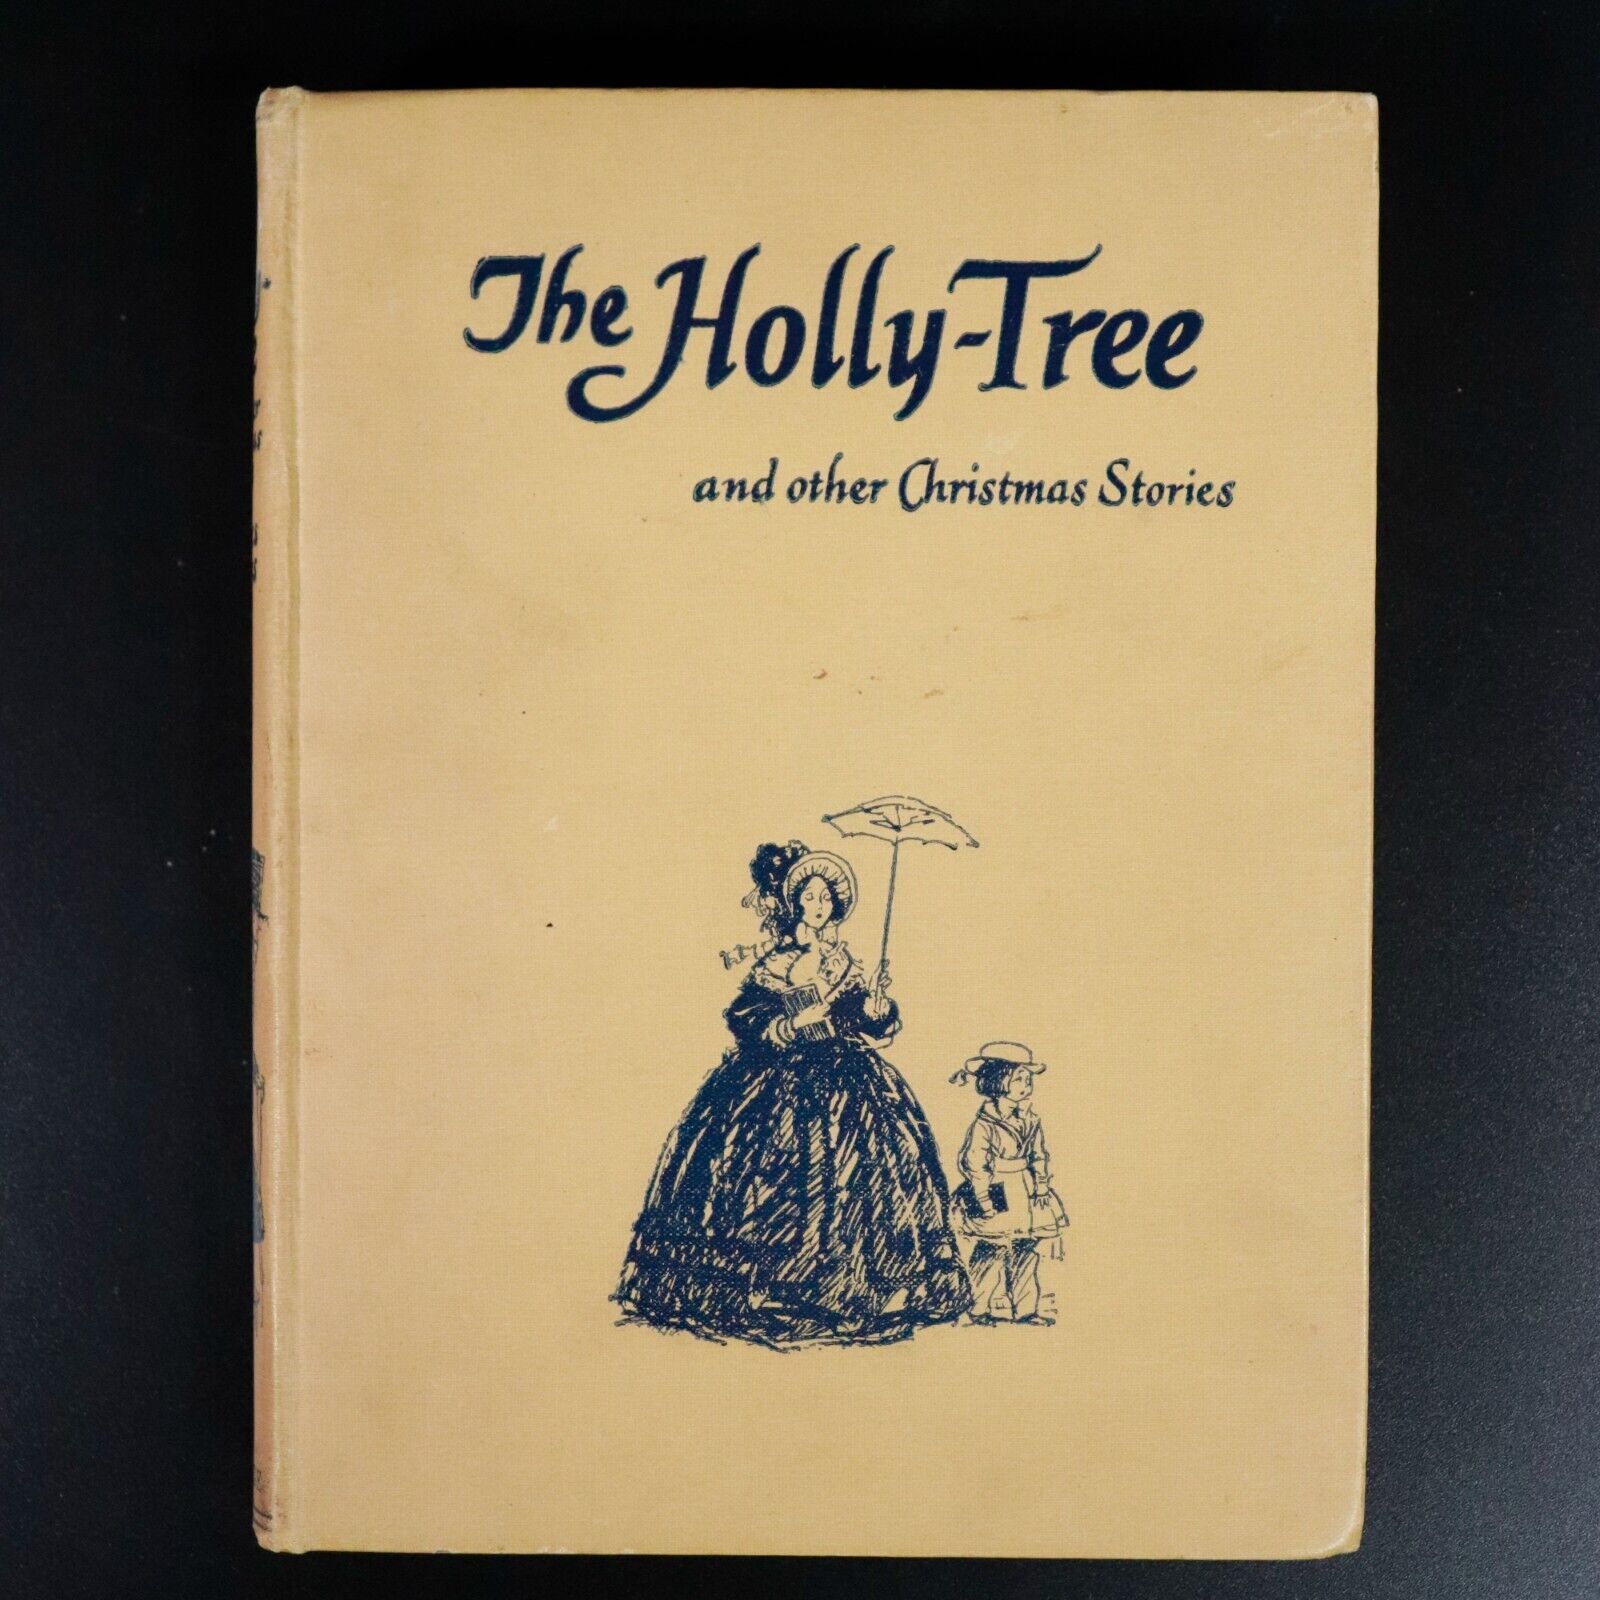 c1935 The Holly Tree & Christmas Stories by Charles Dickens Antique Fiction Book